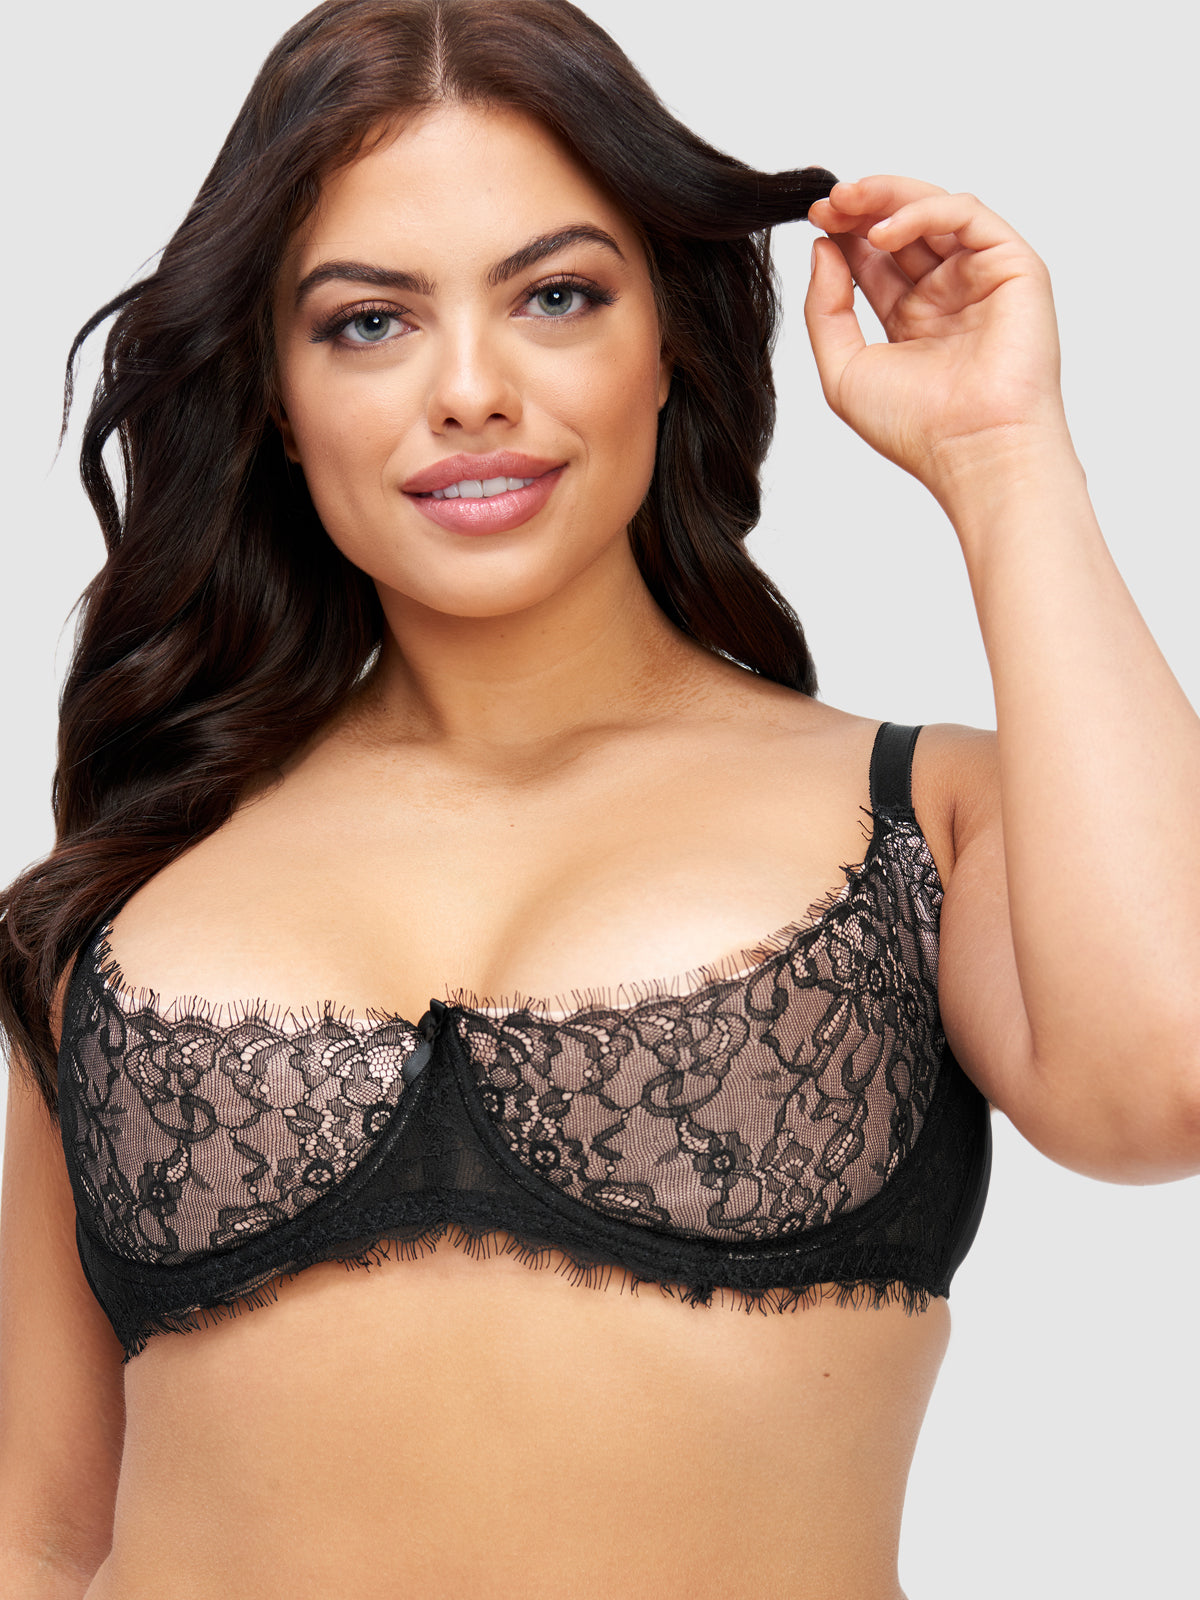 Mindy Open Cup Full Figure Bra - Fredericks of Hollywood